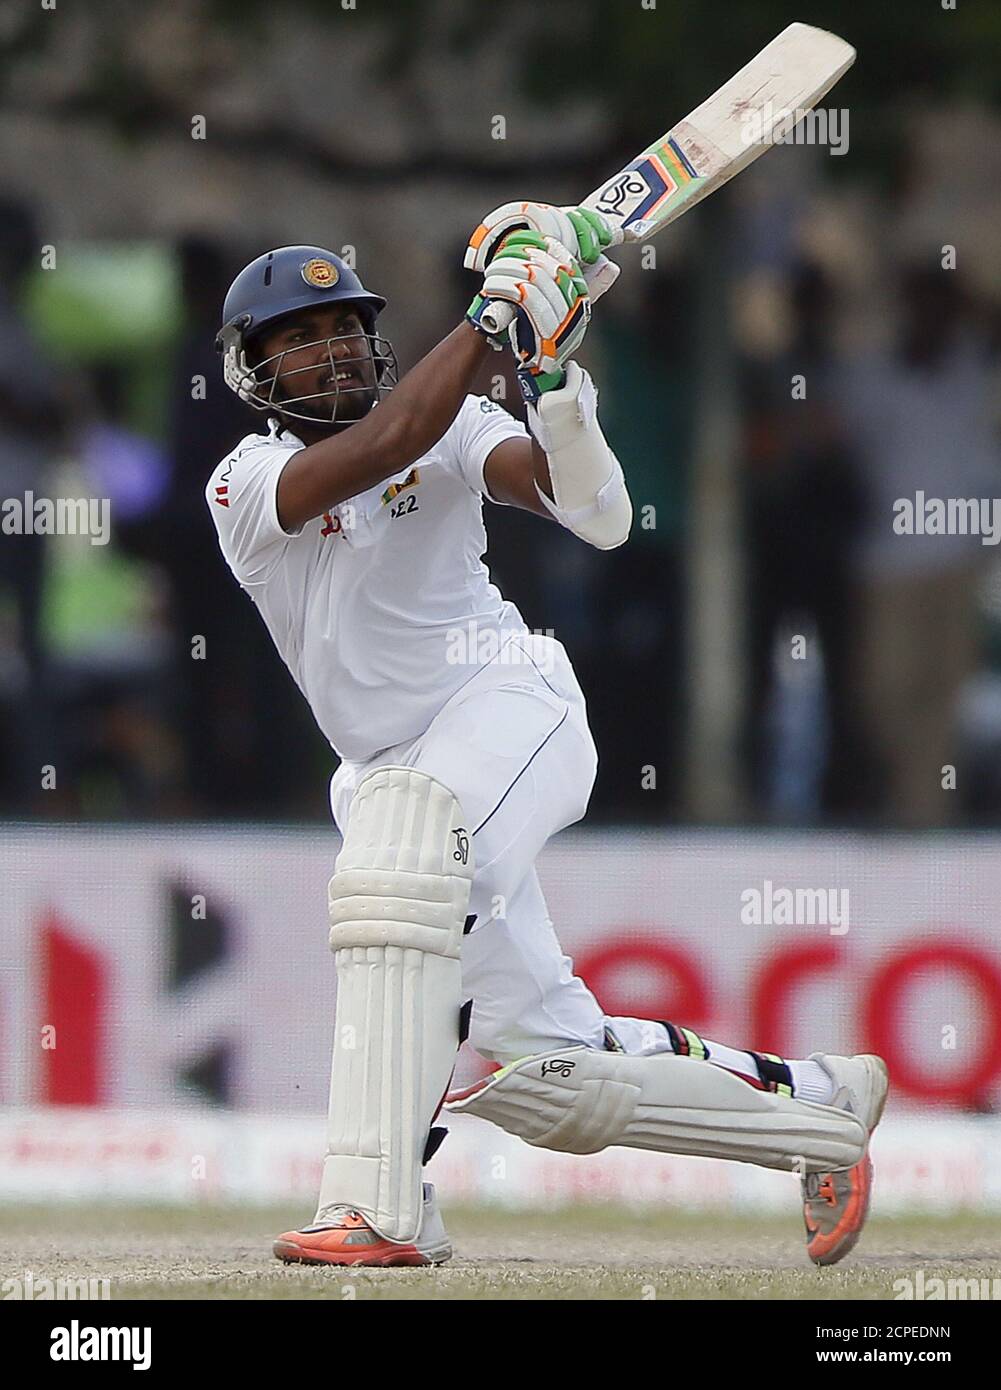 Sri Lanka's Dinesh Chandimal watches his six shot during the third day of their first test cricket match against India in Galle August 14, 2015. REUTERS/Dinuka Liyanawatte Stock Photo